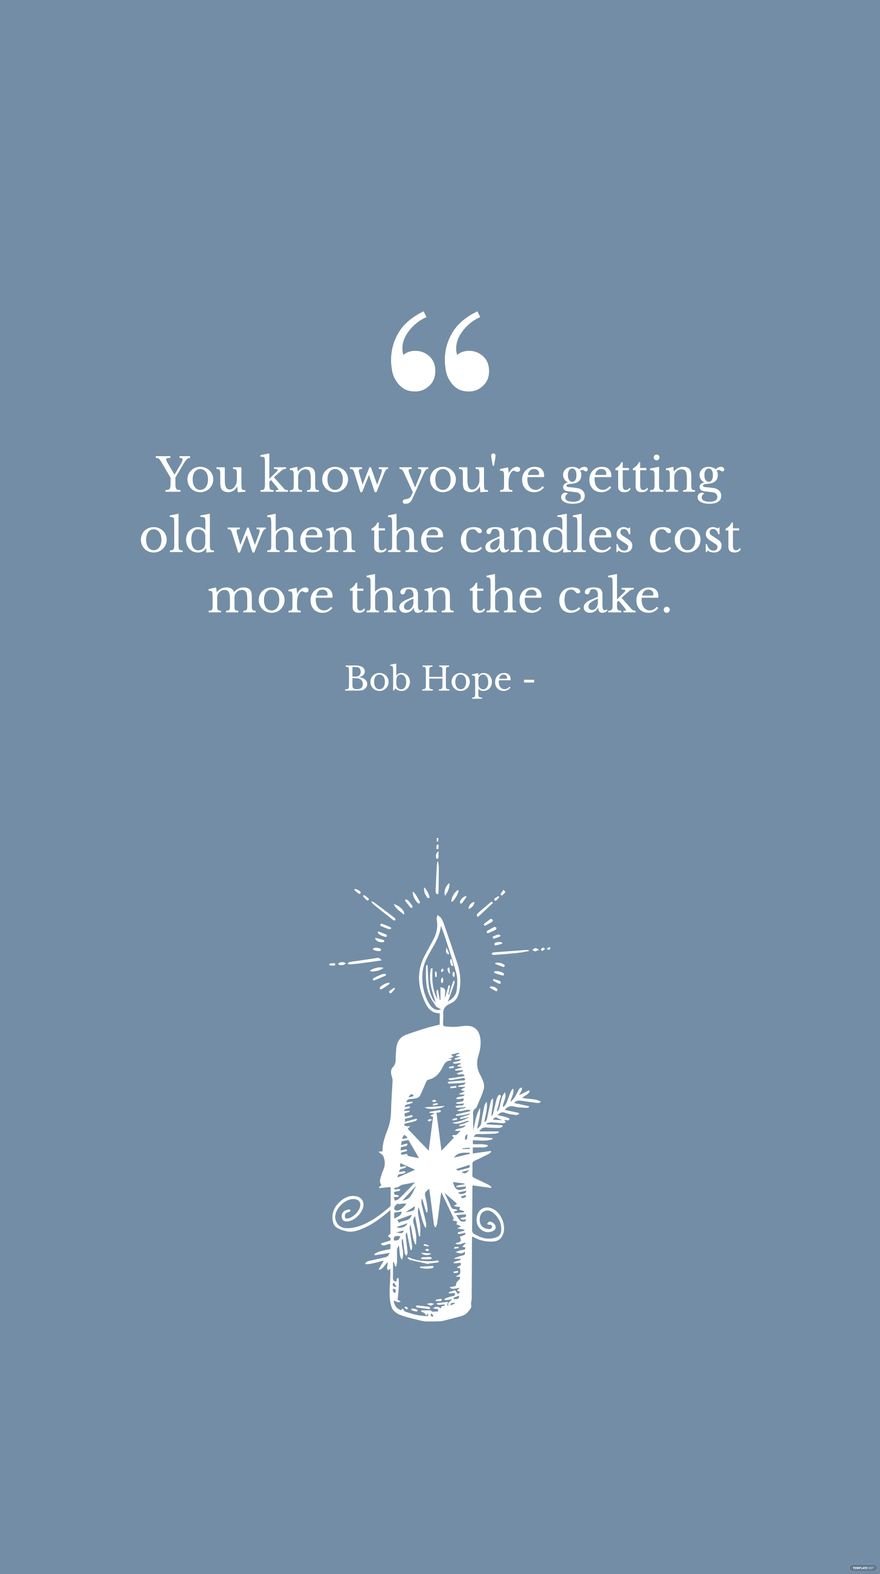 Bob Hope - You know you're getting old when the candles cost more than the cake.